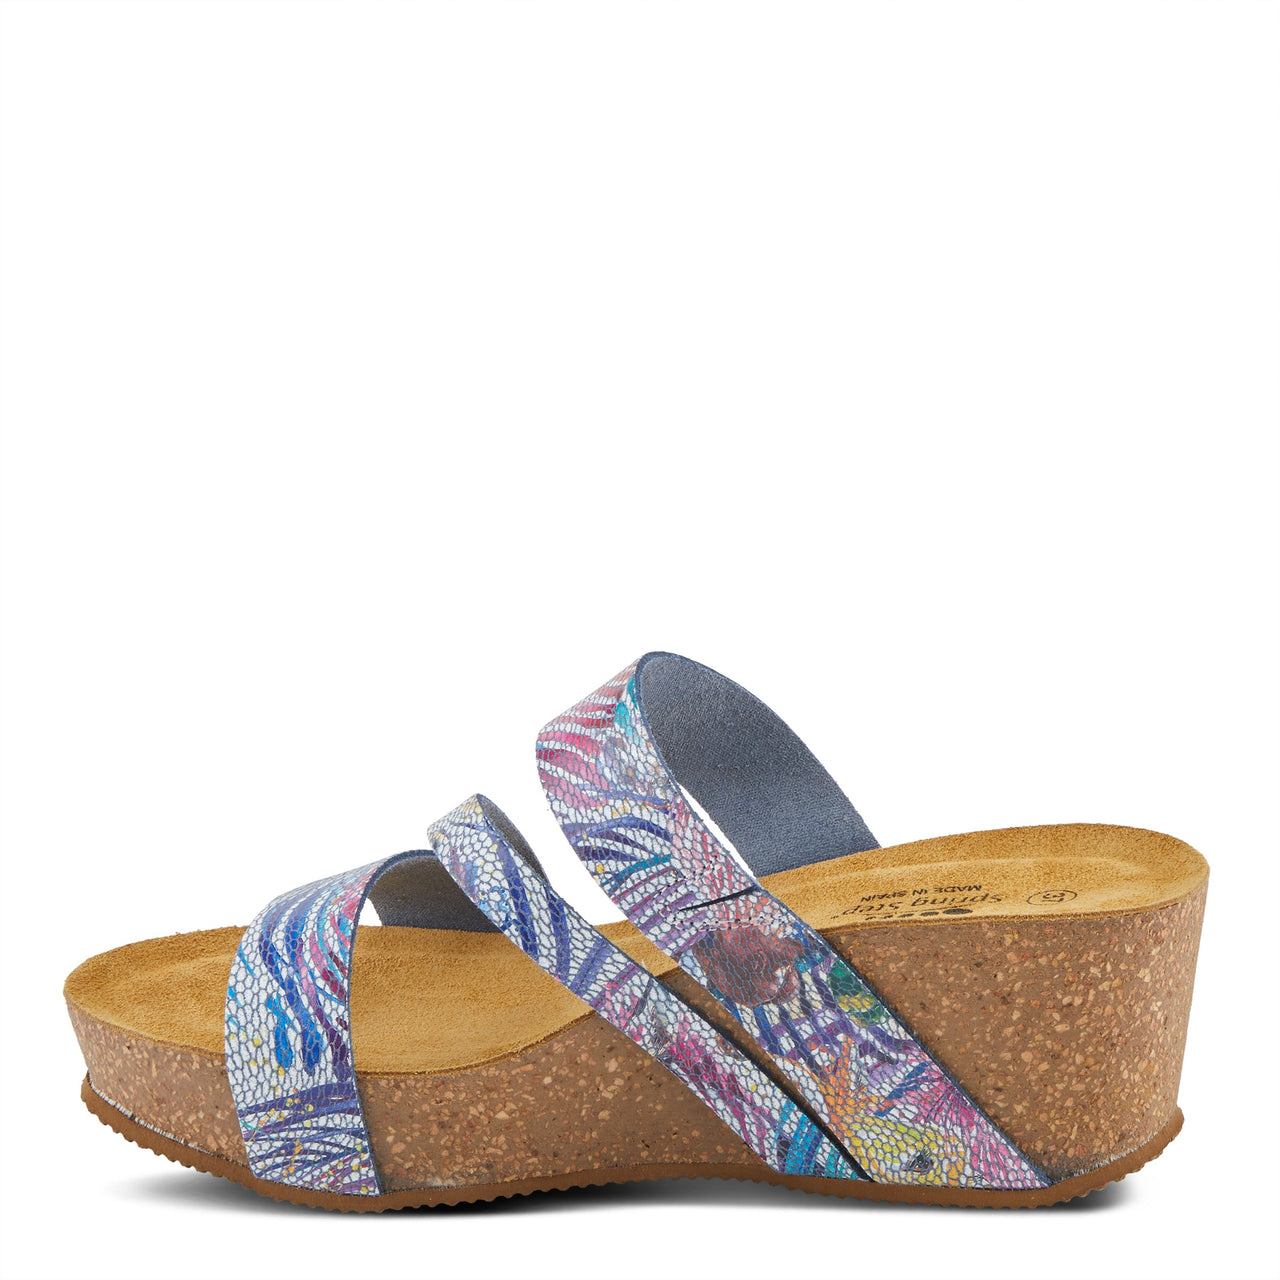  Spring Step Butterpea Sandals with a trendy and versatile design for any occasion